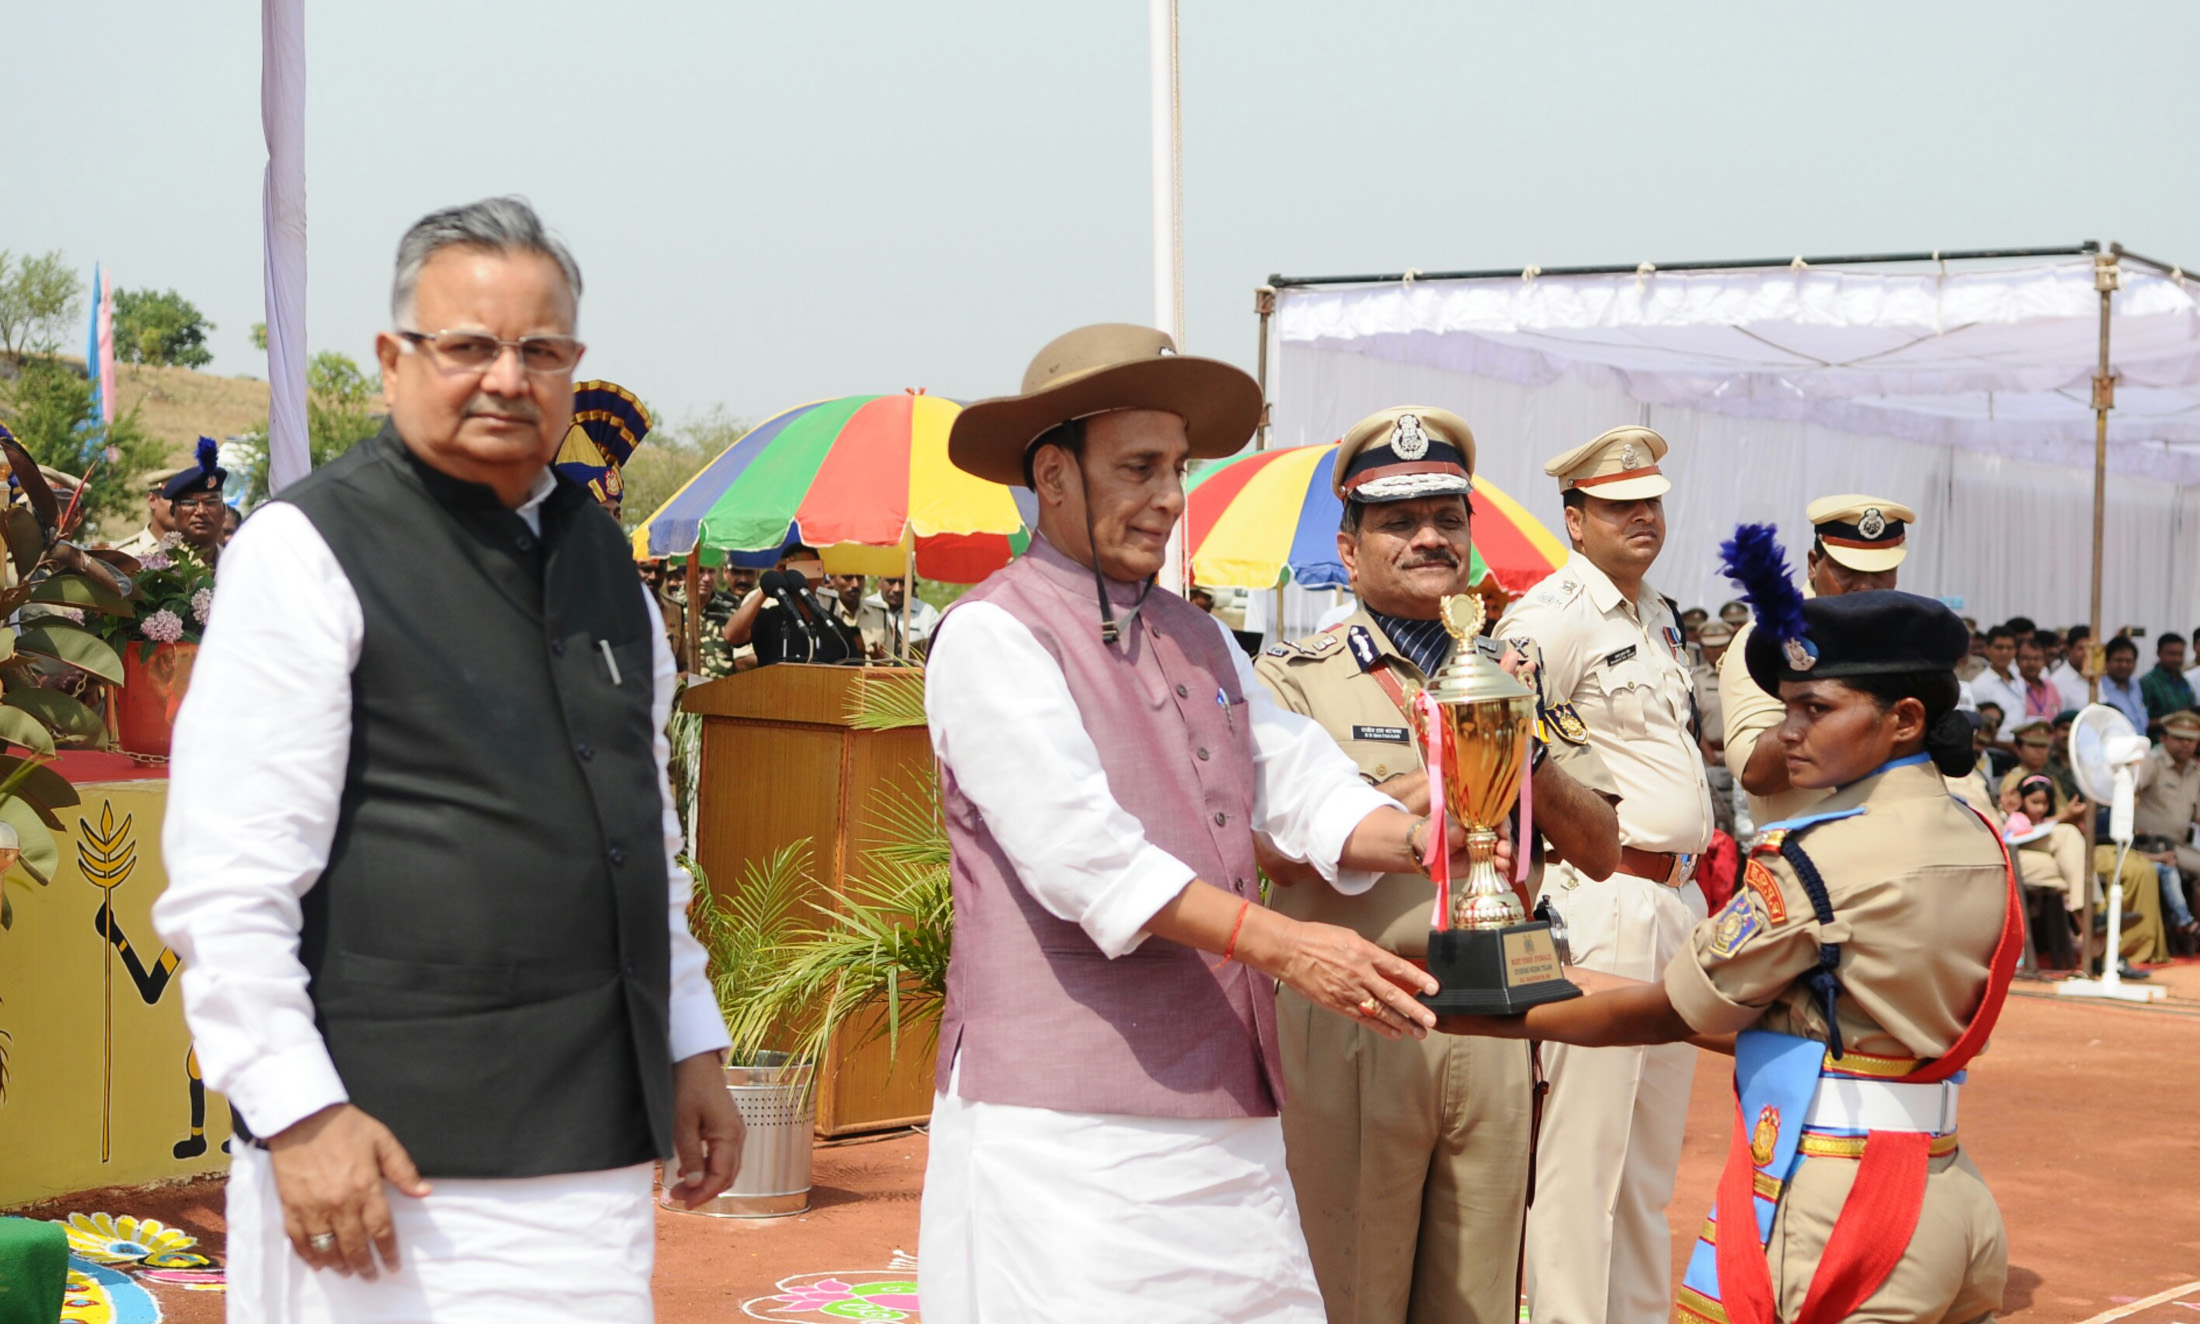 The Union Home Minister, Shri Rajnath Singh presenting trophies, during the Passing Out Parade of the Bastariya Battalion of CRPF, in Ambikapur, in Chhattisgarh on May 21, 2018. 	The Chief Minister of Chhattisgarh, Dr. Raman Singh is are also see